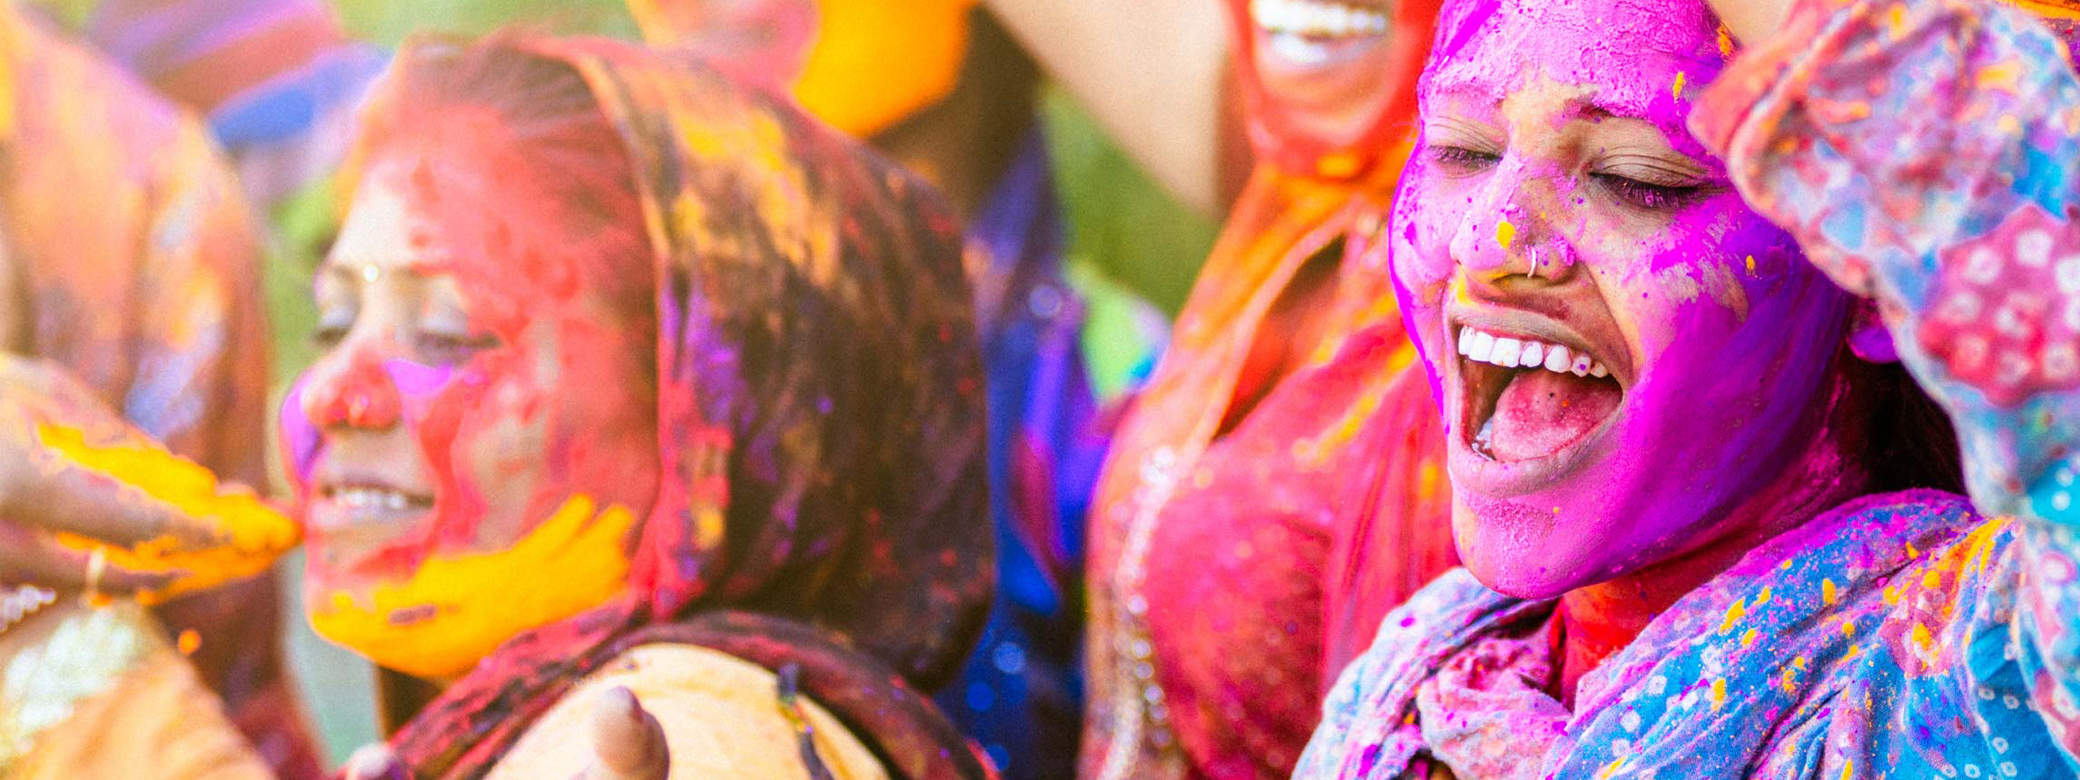 Two smiling students covered in colorful pigments during Holi